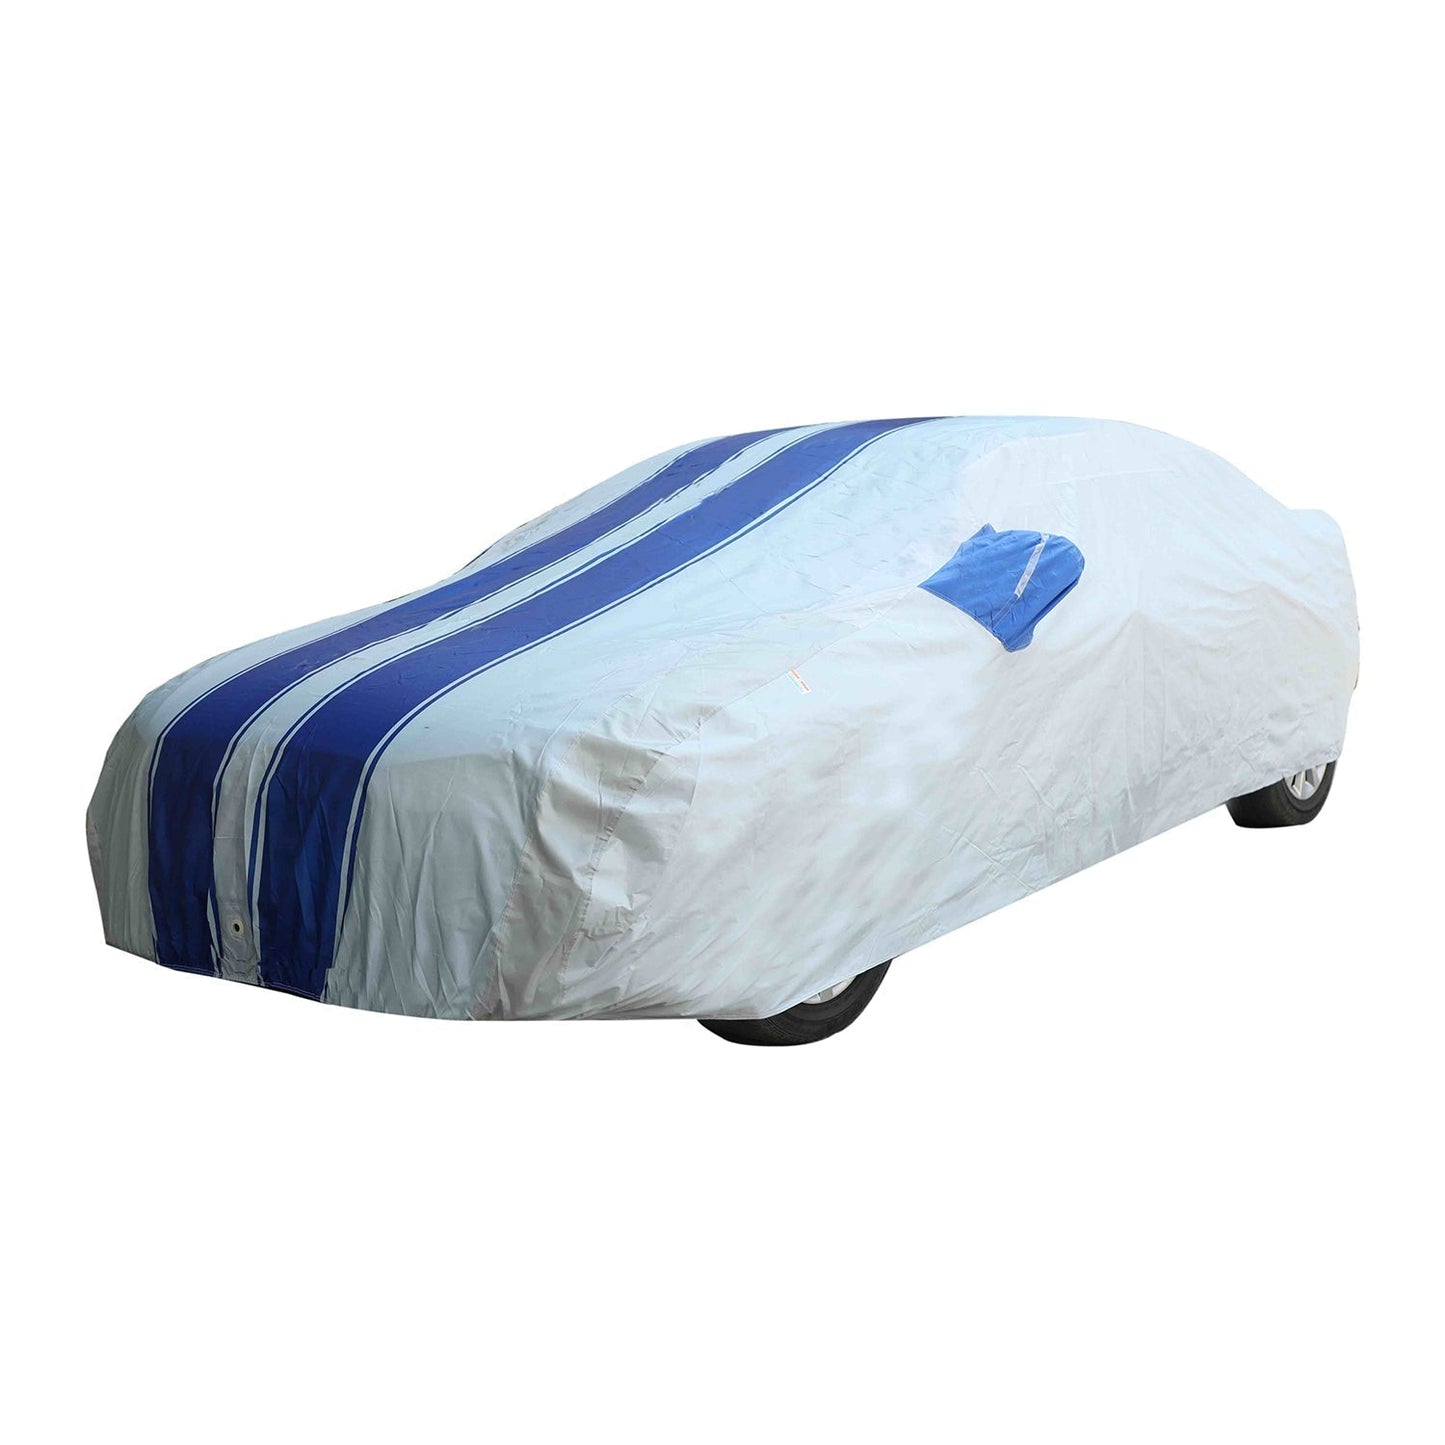 Oshotto 100% Blue dustproof and Water Resistant Car Body Cover with Mirror Pockets For Nissan Terrano